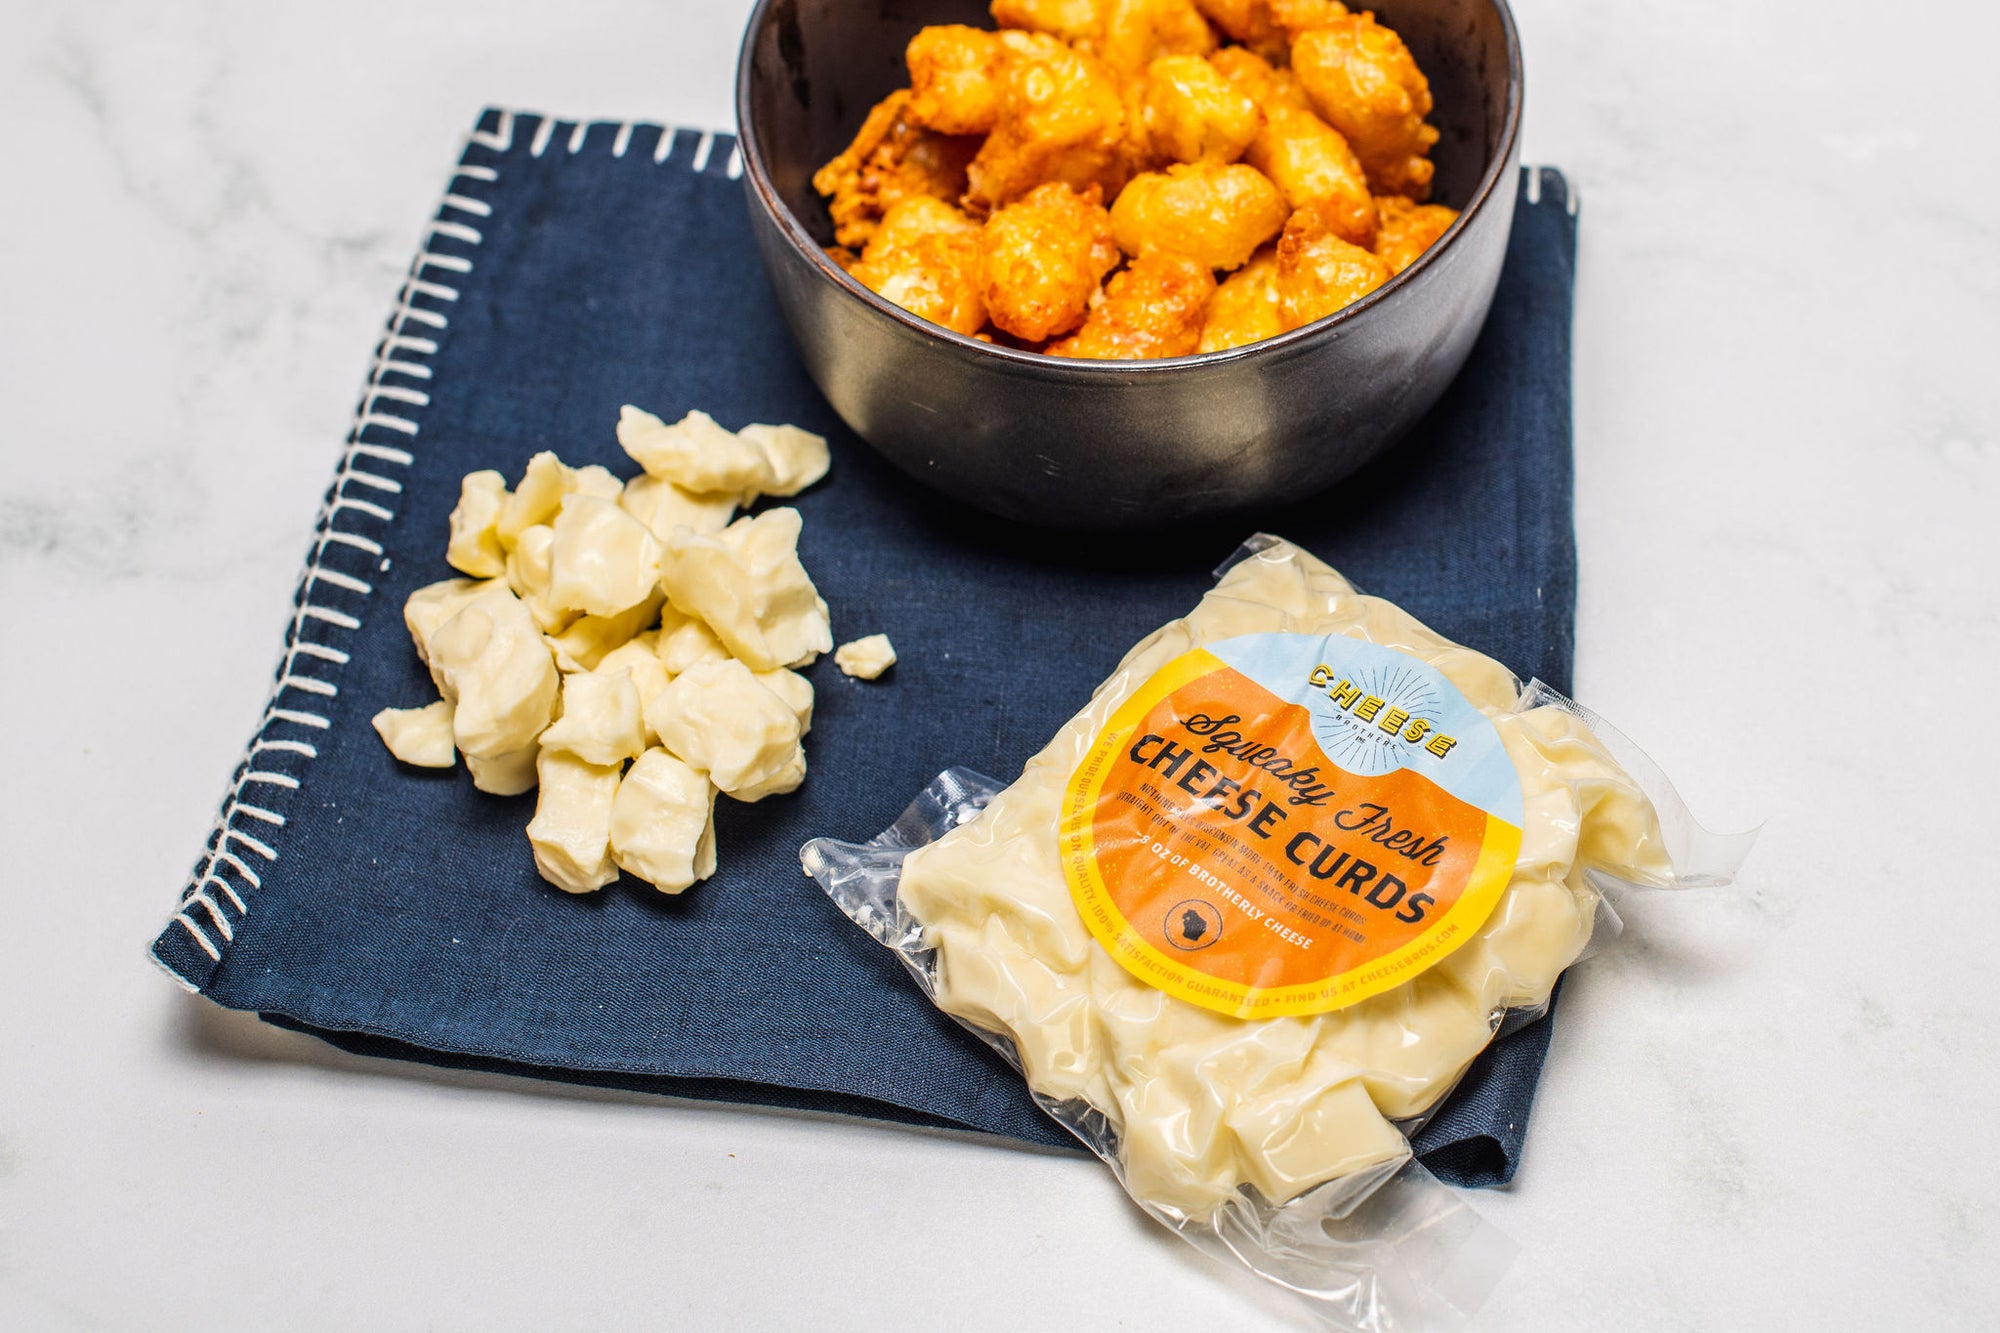 Wisconsin Cheese Curds and Batter Mix Combo Pack